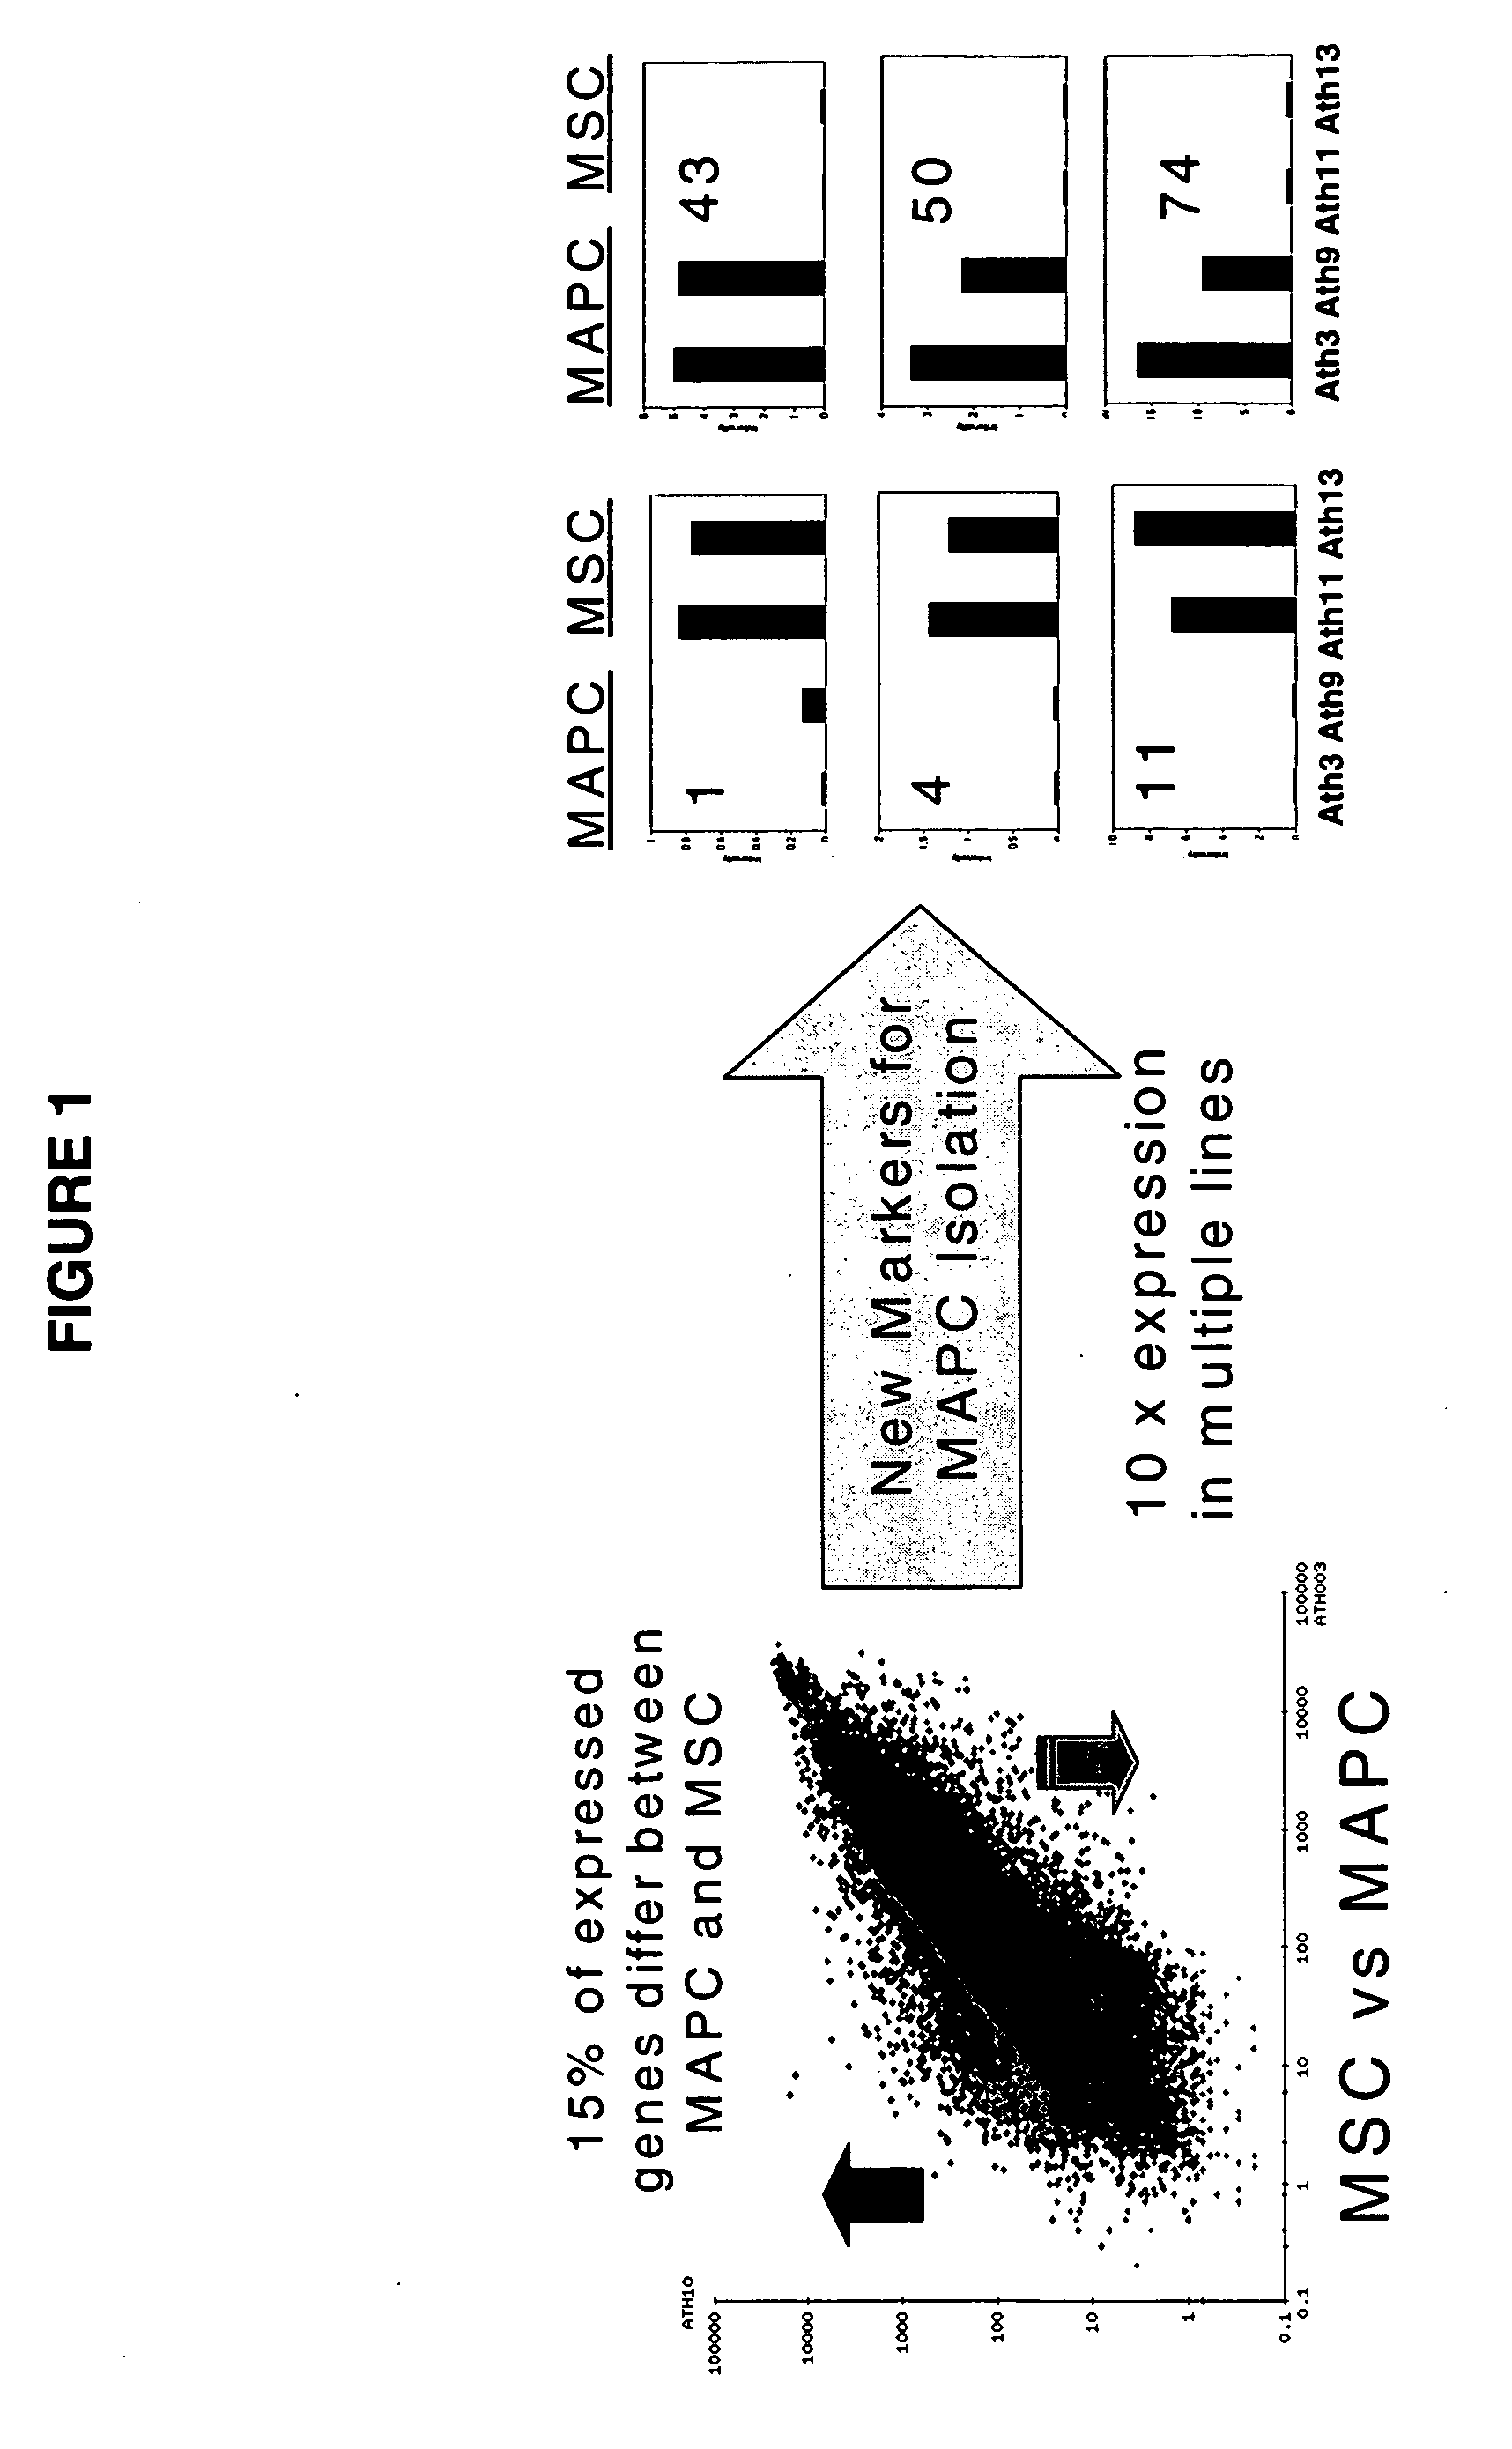 Immunomodulatory properties of multipotent adult progenitor cells and uses thereof